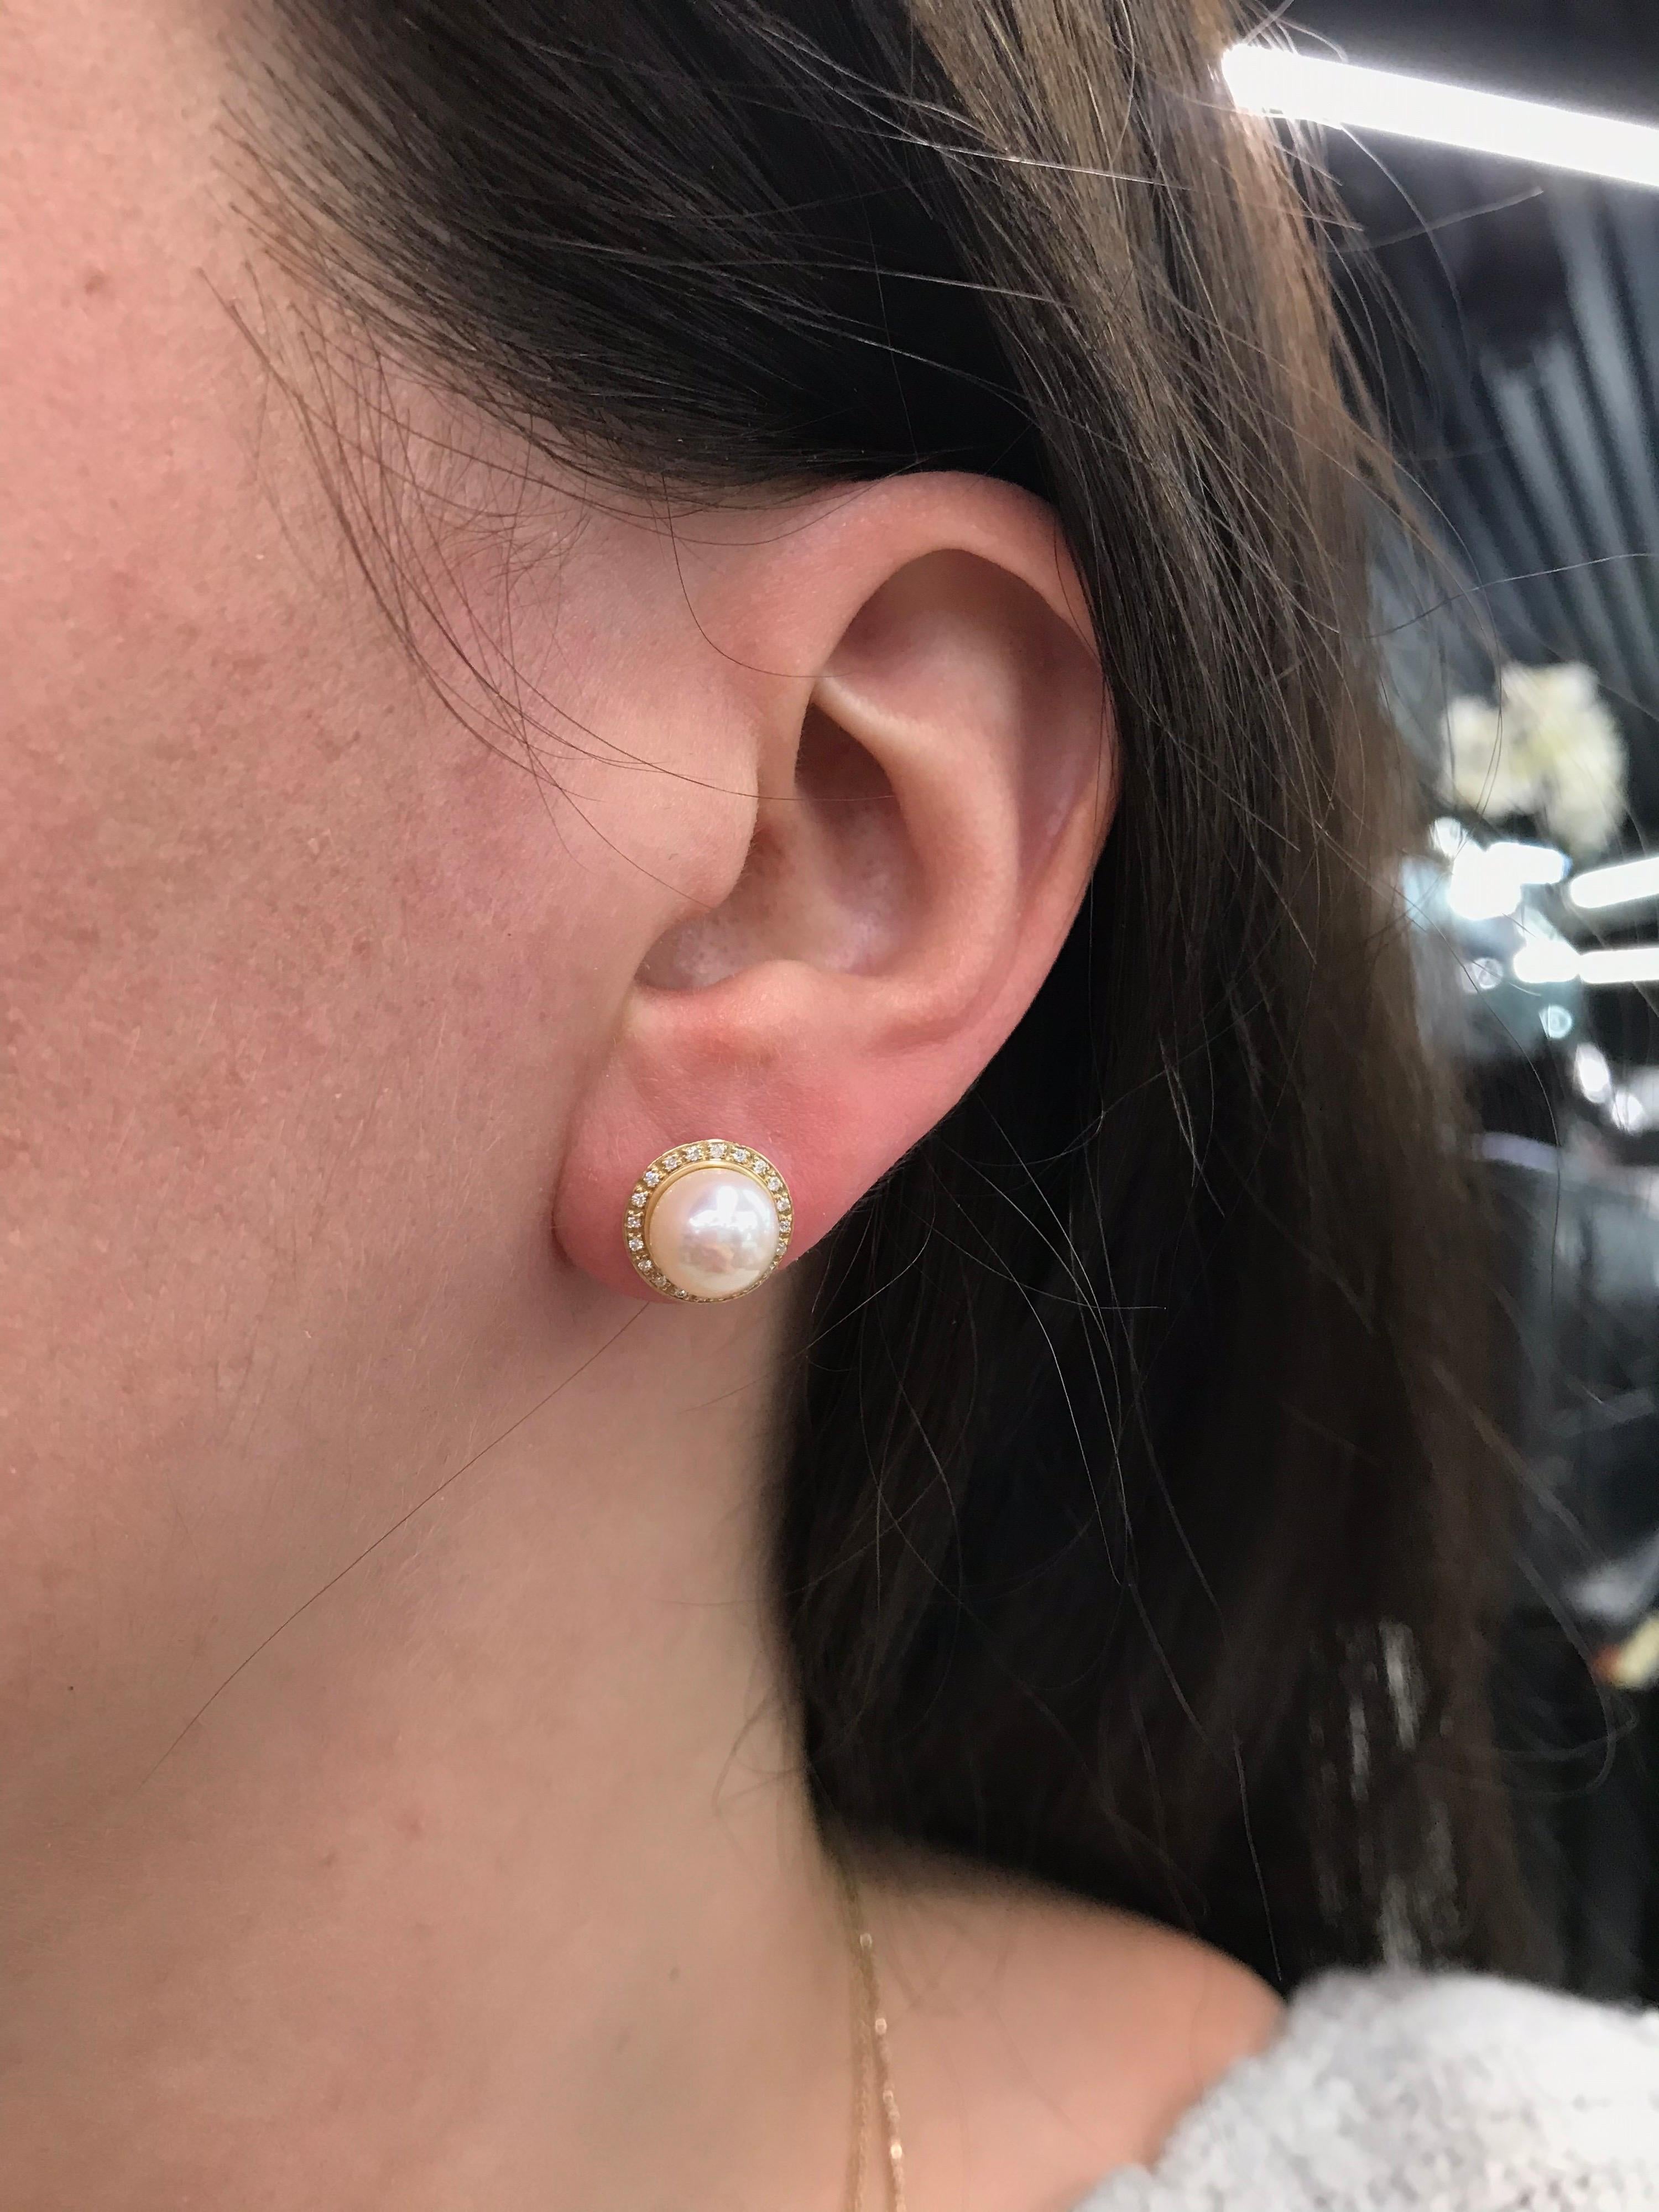 14K Yellow gold stud earrings featuring two Freshwater pearls measuring 8-9mm flanked with 40 round brilliants weighing 0.10 carats.
Color G-H
Clarity SI